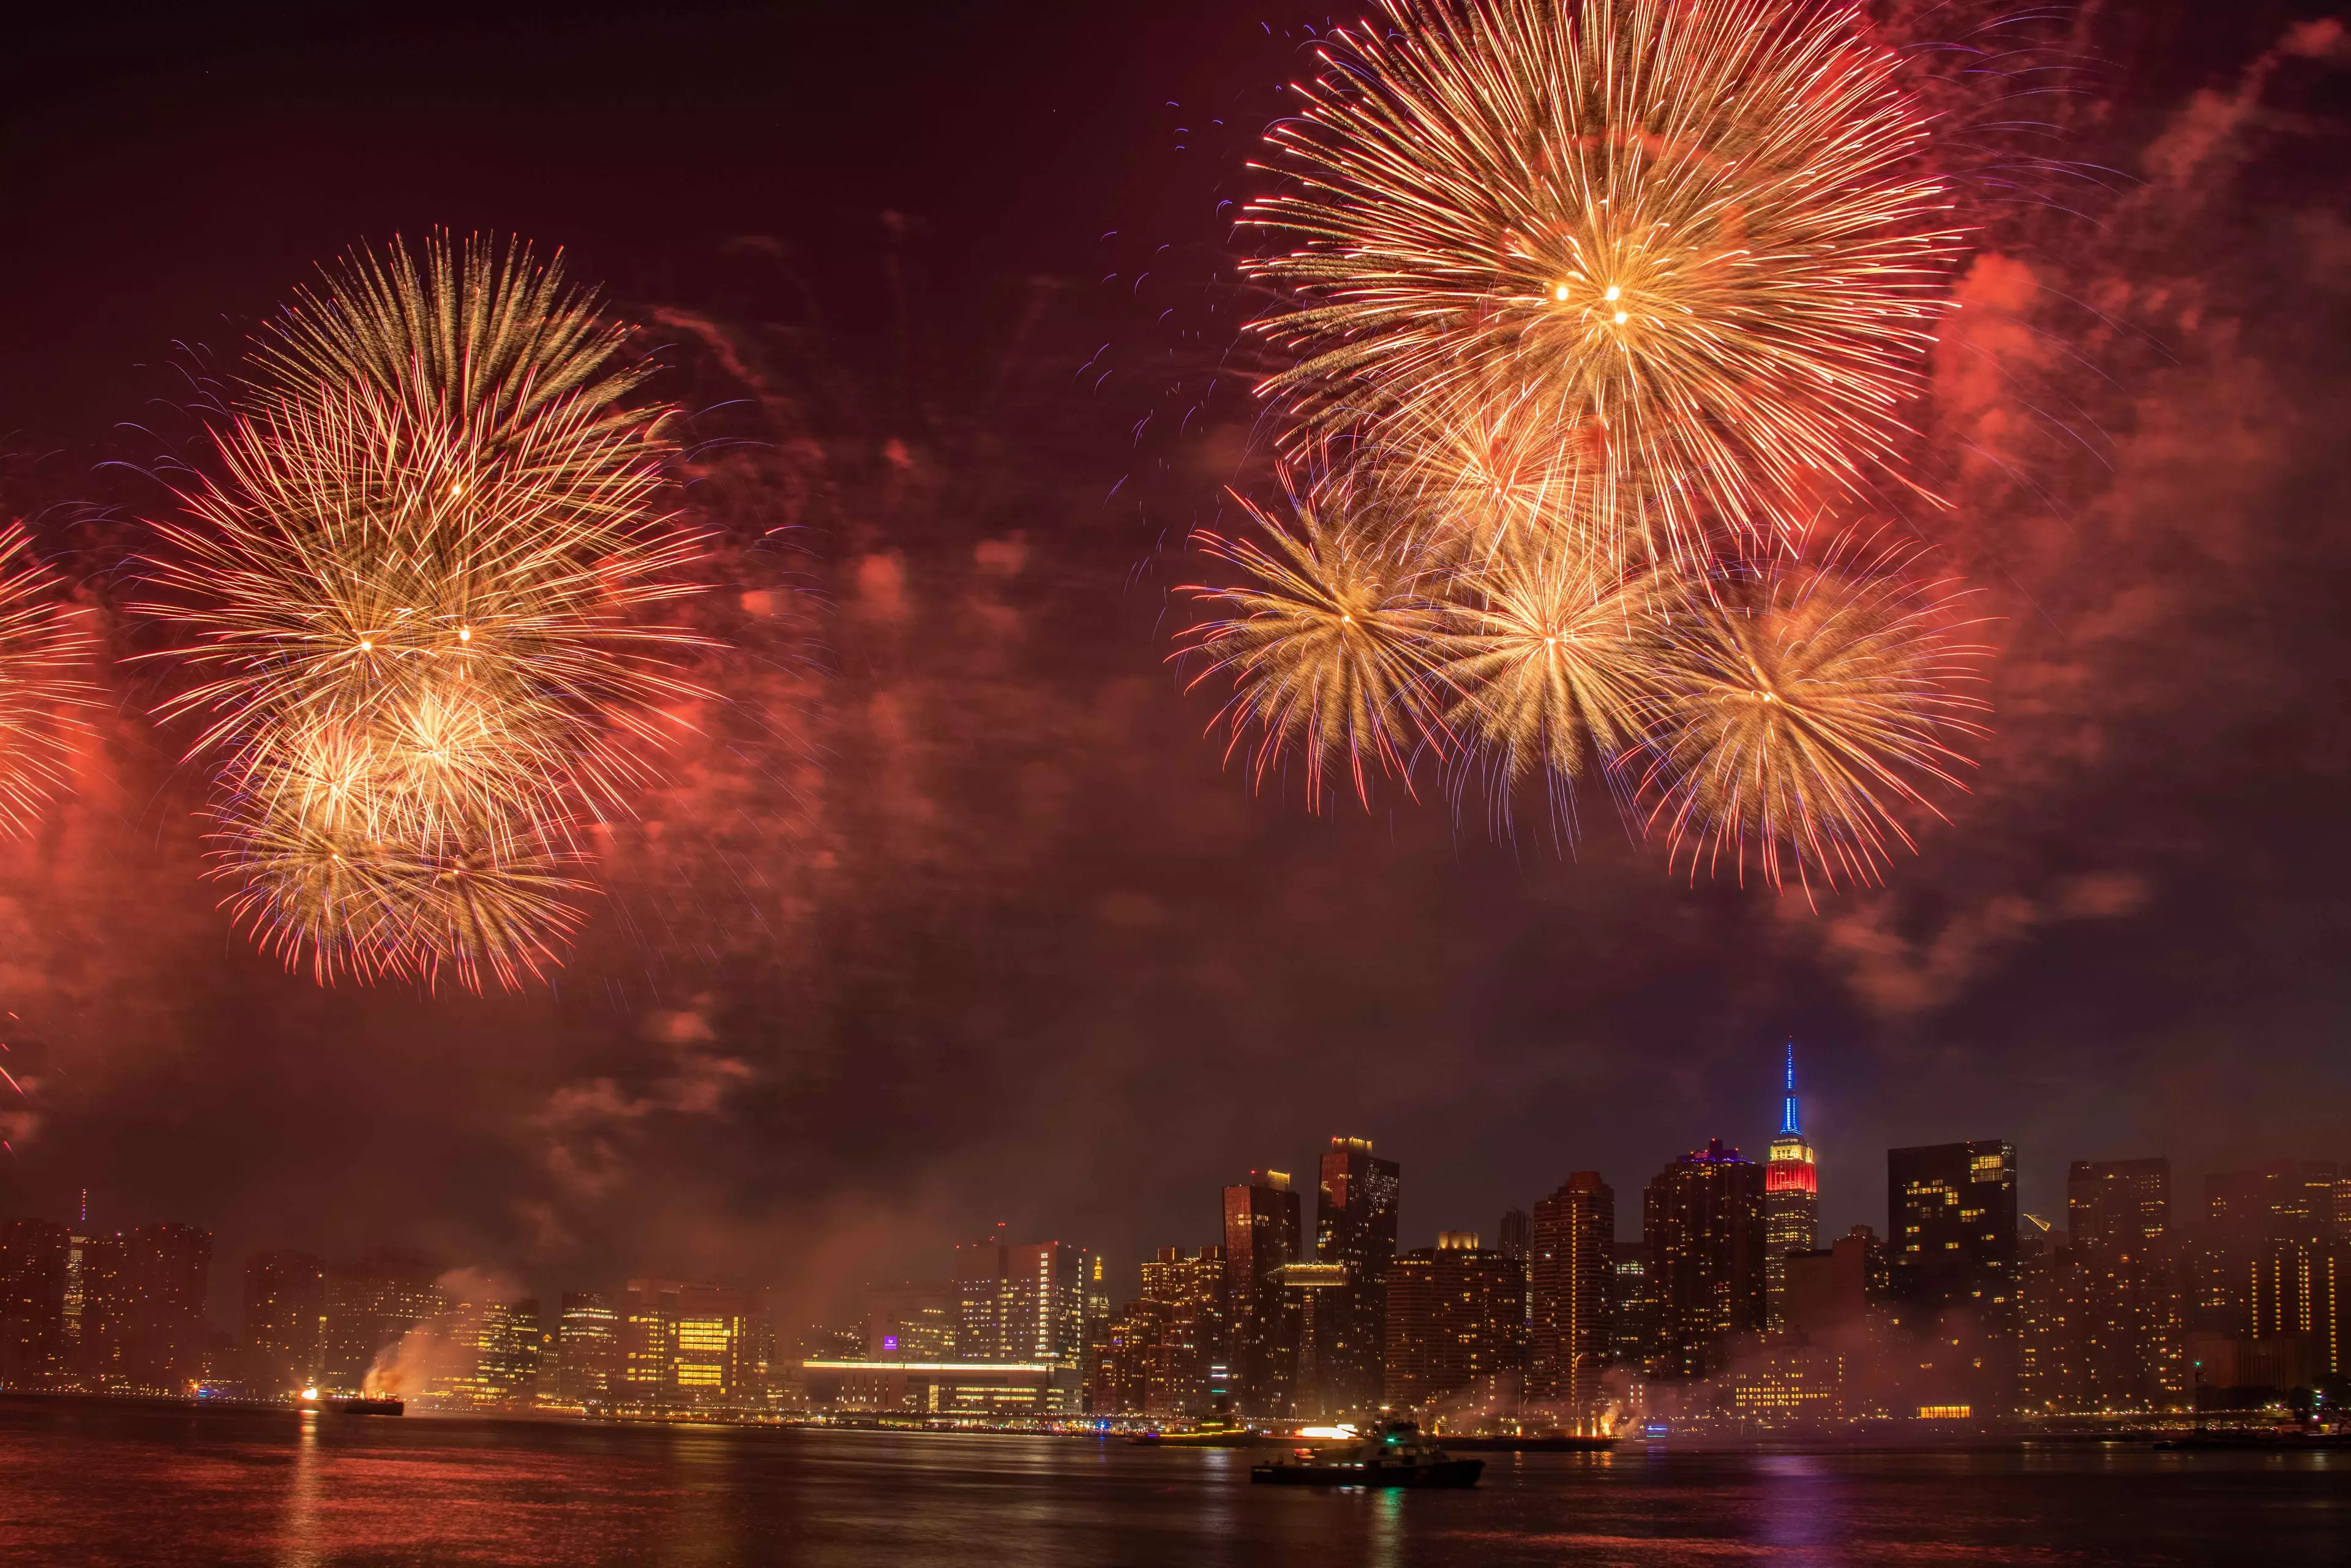 Fireworks in New York to celebrate Independence Day 2021.